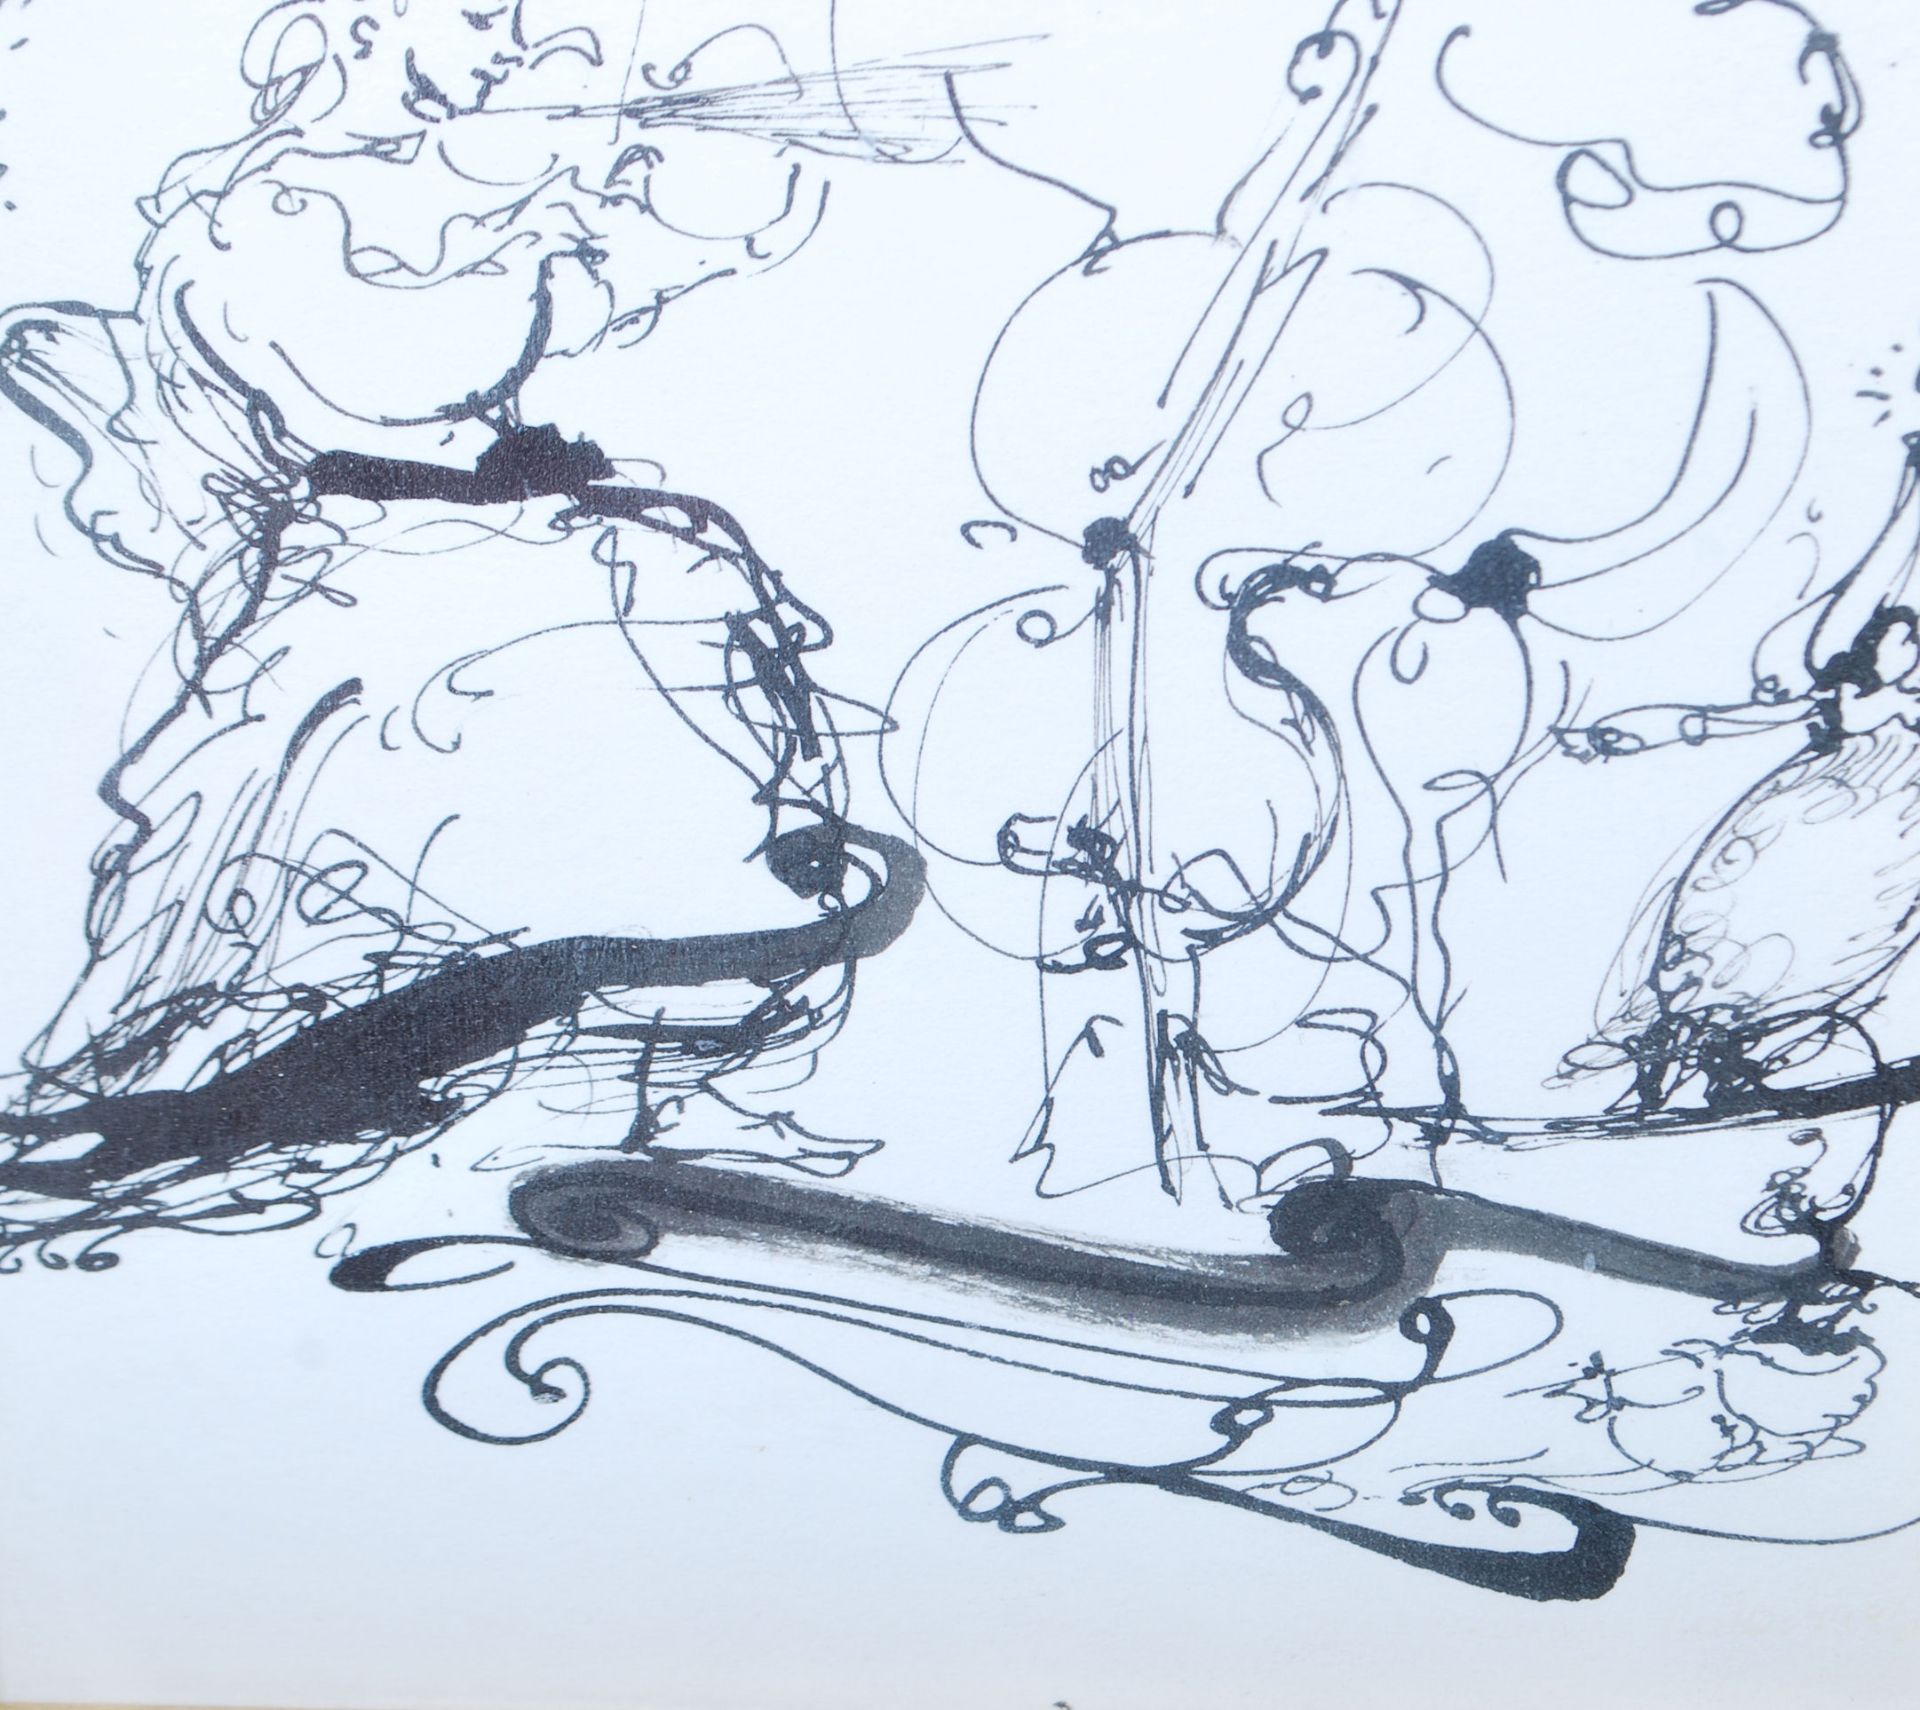 DEENAGH MILLER LOCAL INTEREST INK DRAWING OF MUSICIANS - Image 4 of 5